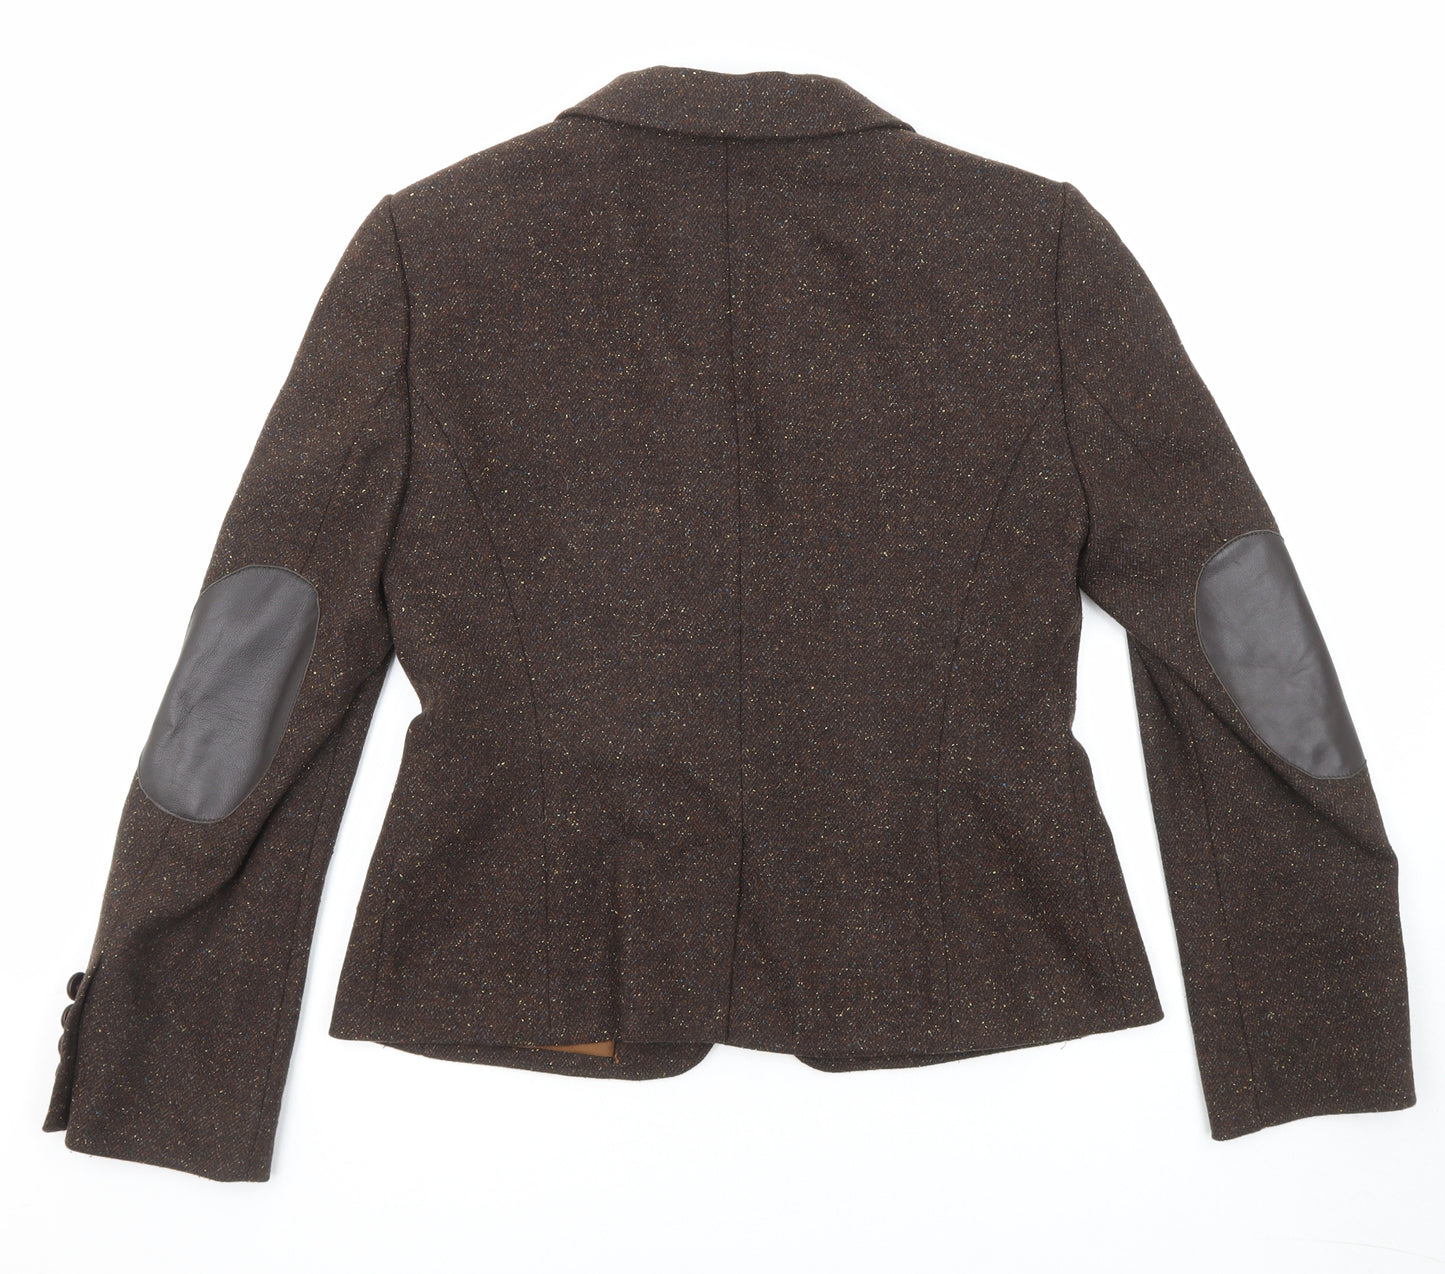 Betty Barclay Womens Brown Jacket Blazer Size 10 Button - Elbow Patches